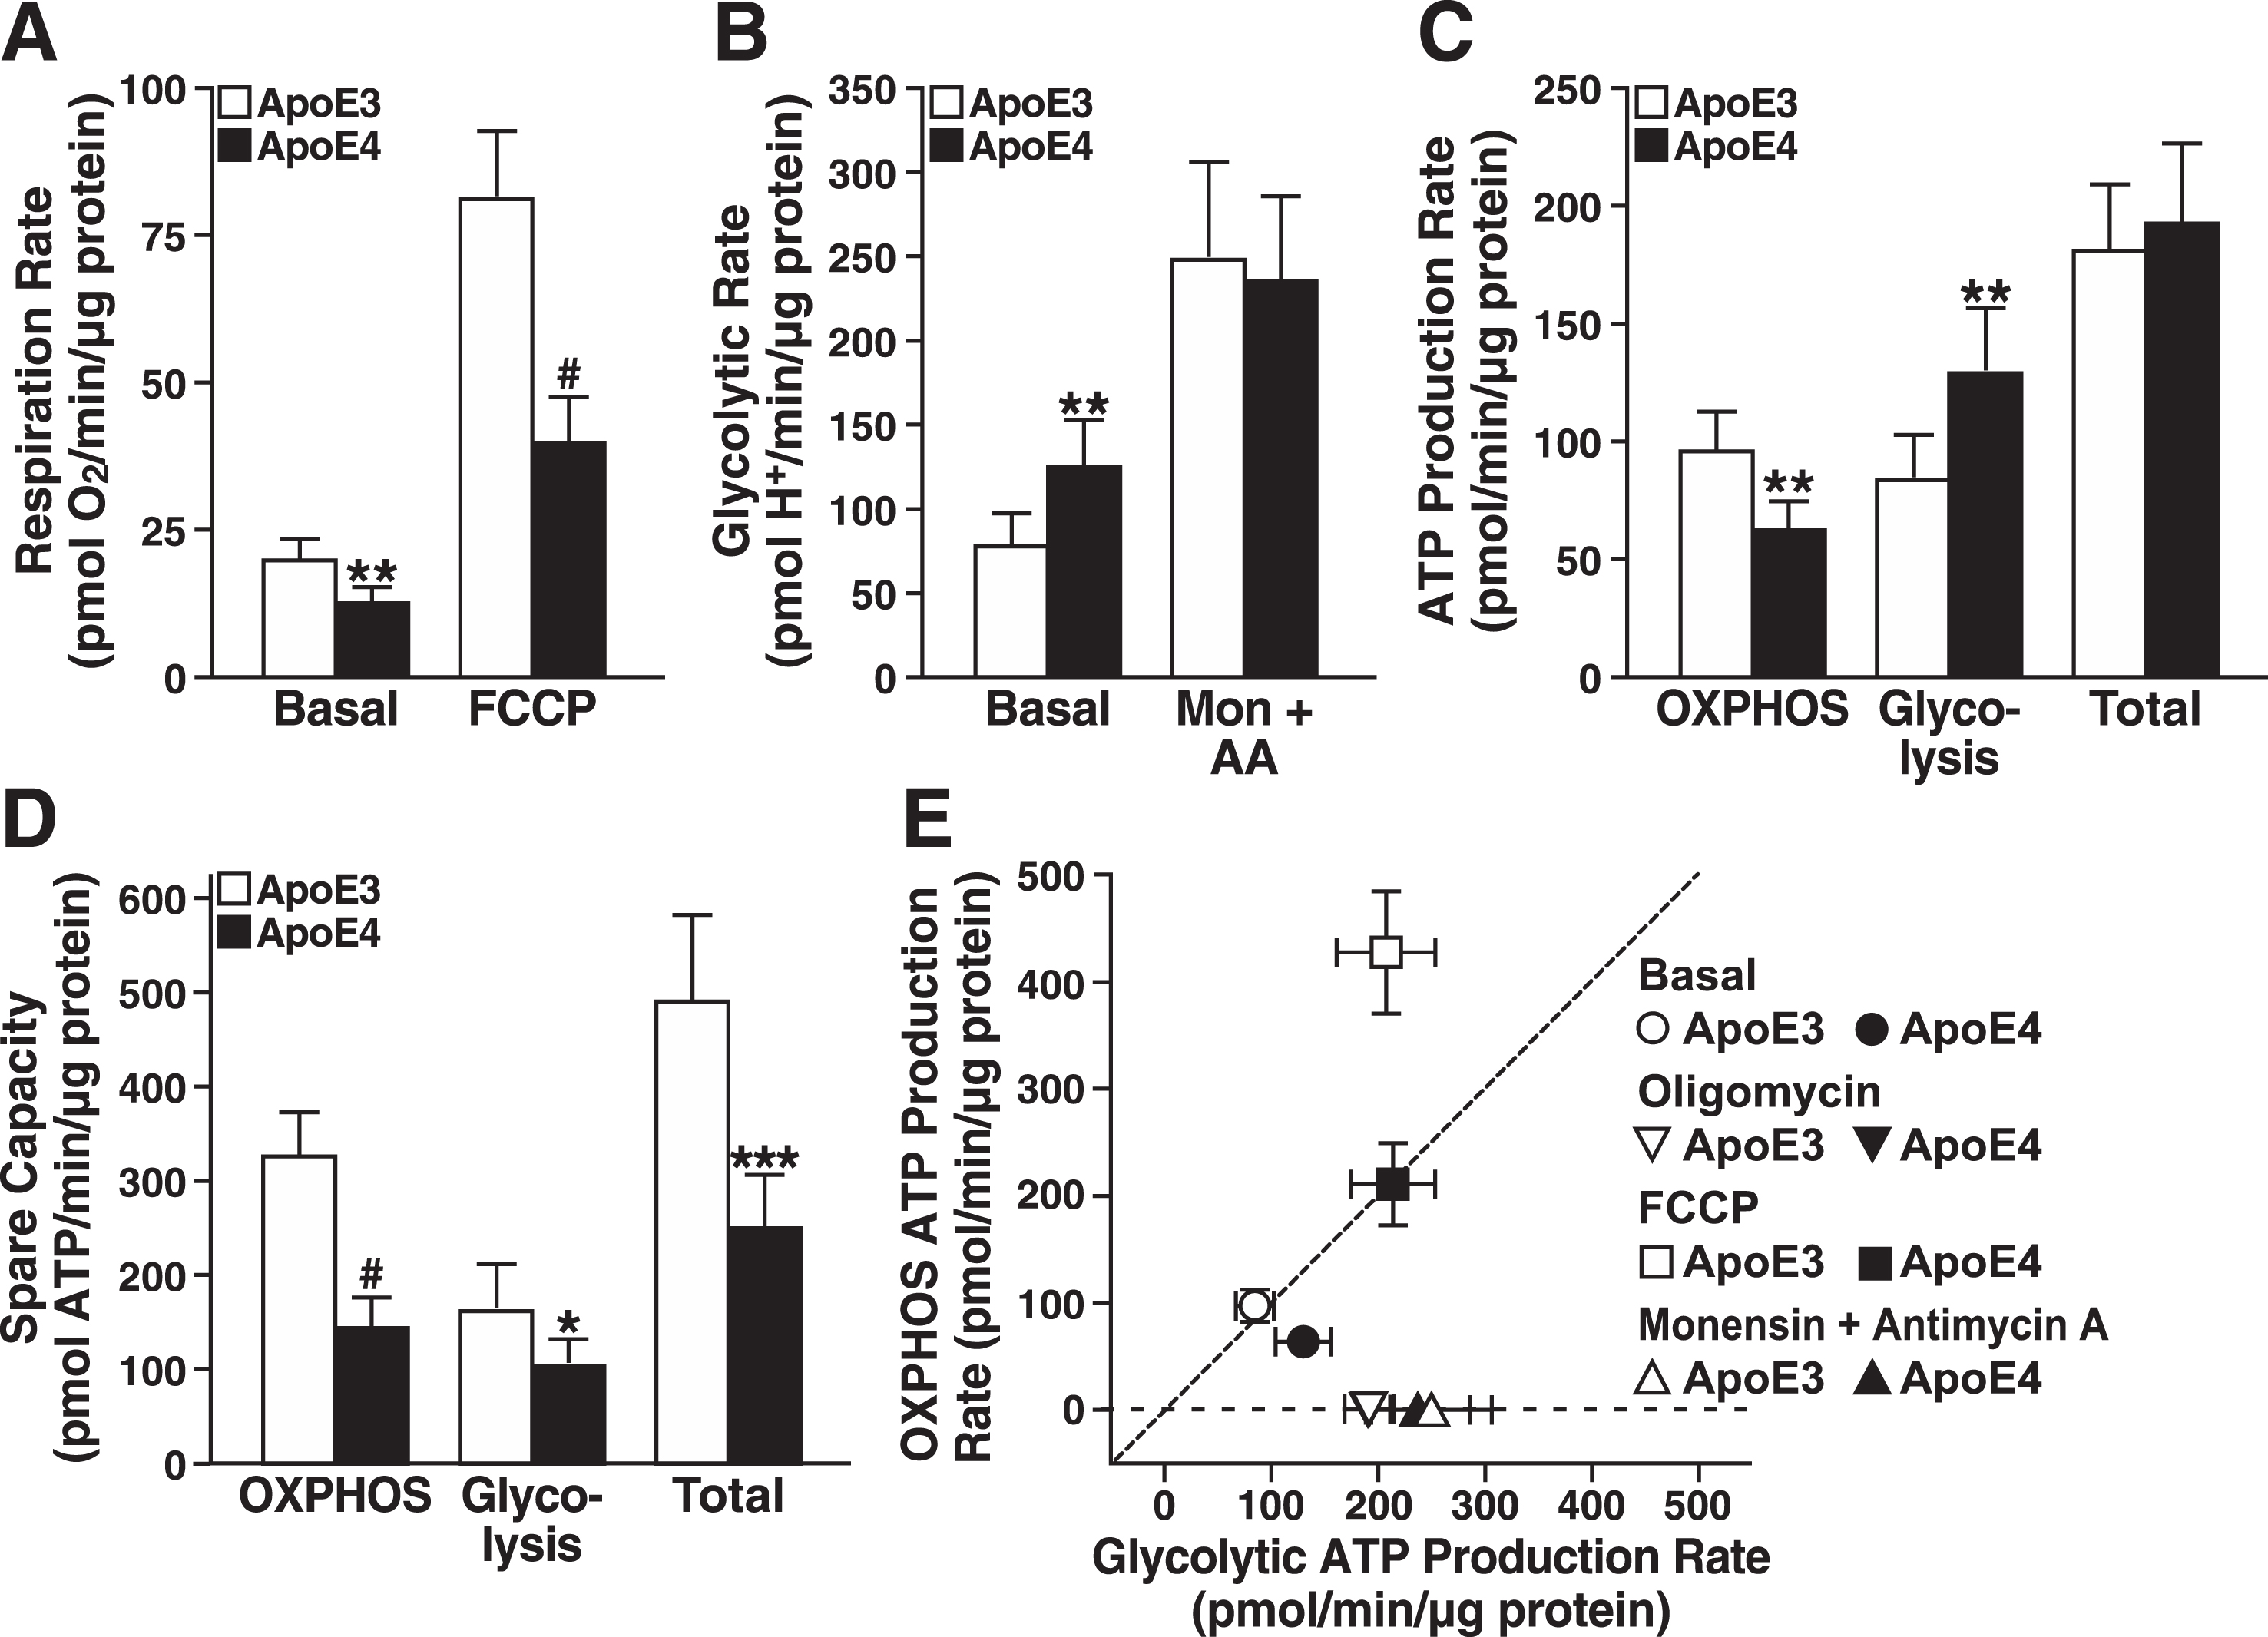 ApoE4 expression limits the bioenergetic capacity of neural cells. A) Respiration rates of N2a-apoE3 and N2a-apoE4 cells under basal and FCCP-stimulated conditions. B) Estimated glycolytic rates of N2a-apoE3 and N2a-apoE4 cells under basal and monensin- and antimycin A–stimulated conditions. C) ATP production rates calculated from mitochondrial and glycolytic rates under basal conditions in A and B. Total ATP production rate is the sum of OXPHOS and glycolytic rates for each cell line. D) Spare ATP production capacity for mitochondrial and glycolytic sources during maximal stimulation. E) Bioenergetic space plot of mitochondrial and glycolytic ATP production rates under basal, ATP-synthase inhibited (Oligomycin), respiration-stimulated (FCCP), or glycolysis-only stimulated (Monensin + Antimycin A) conditions. The dashed line marks the transition where cells generate over 50% of their ATP from OXPHOS (above dashed line) or from glycolysis (below dashed line). FCCP-stimulated ATP production rates are theoretically based on expected ATP from coupled mitochondria respiring at the same rate. A–E, values are mean±SD (n = 6). *p < 0.05, **p < 0.01, ***p < 0.001, #p < 0.0001 versus N2a-apoE3 under same condition by t test. Mon, monensin; AA, antimycin A.